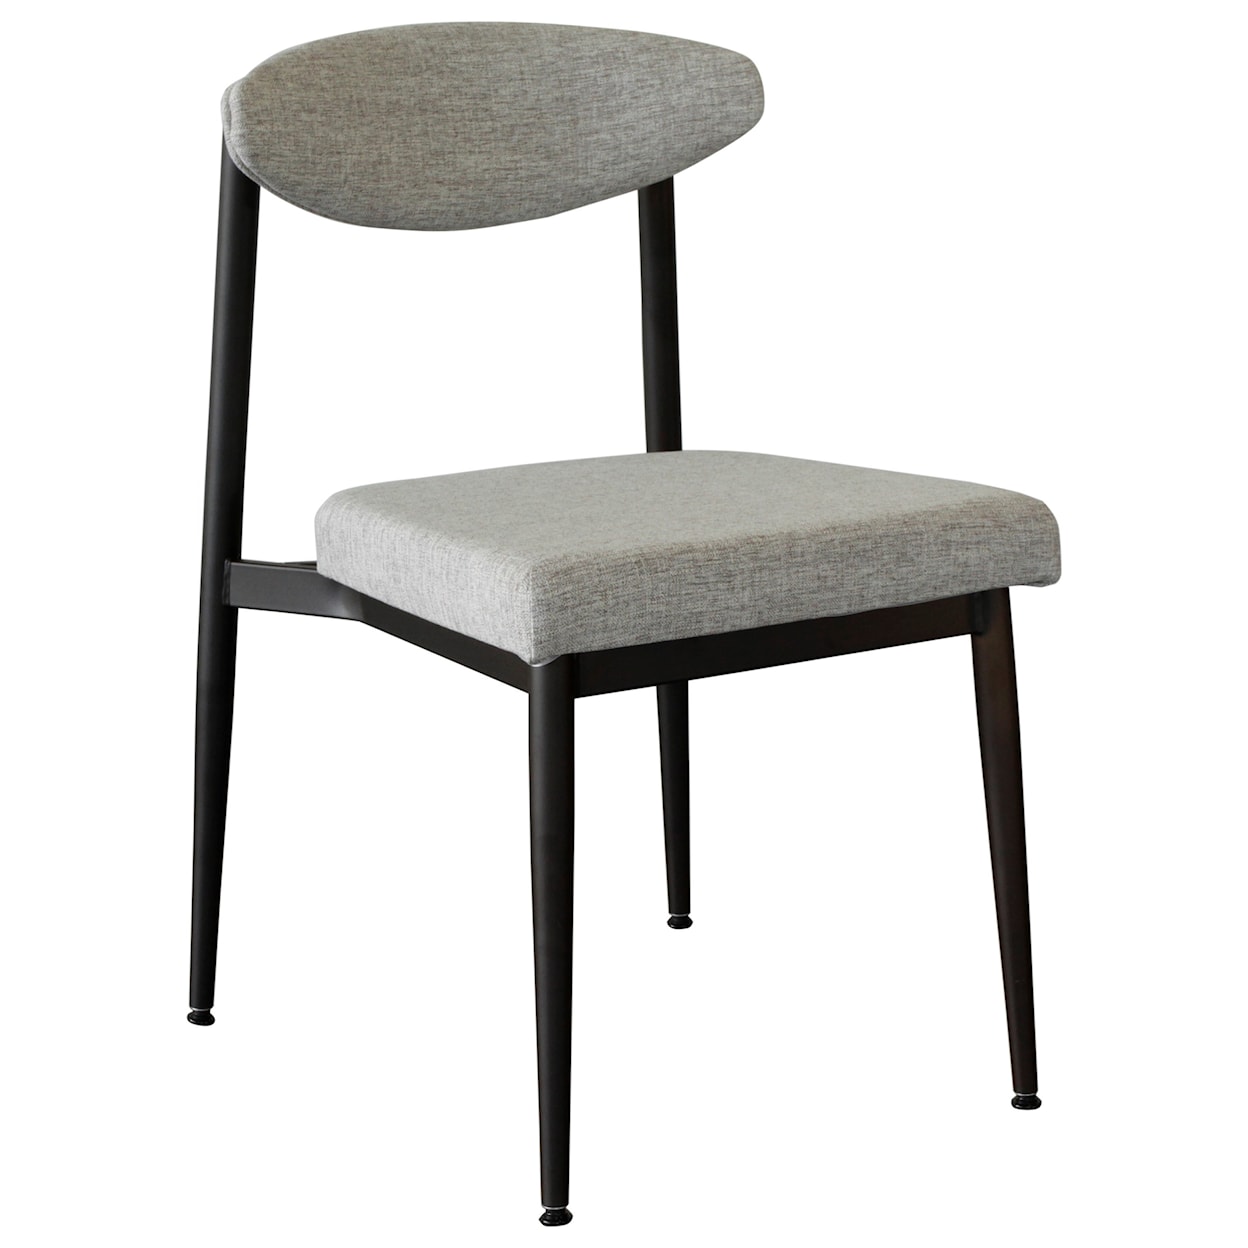 Amisco Nordic Wilbur Upholstered Chair